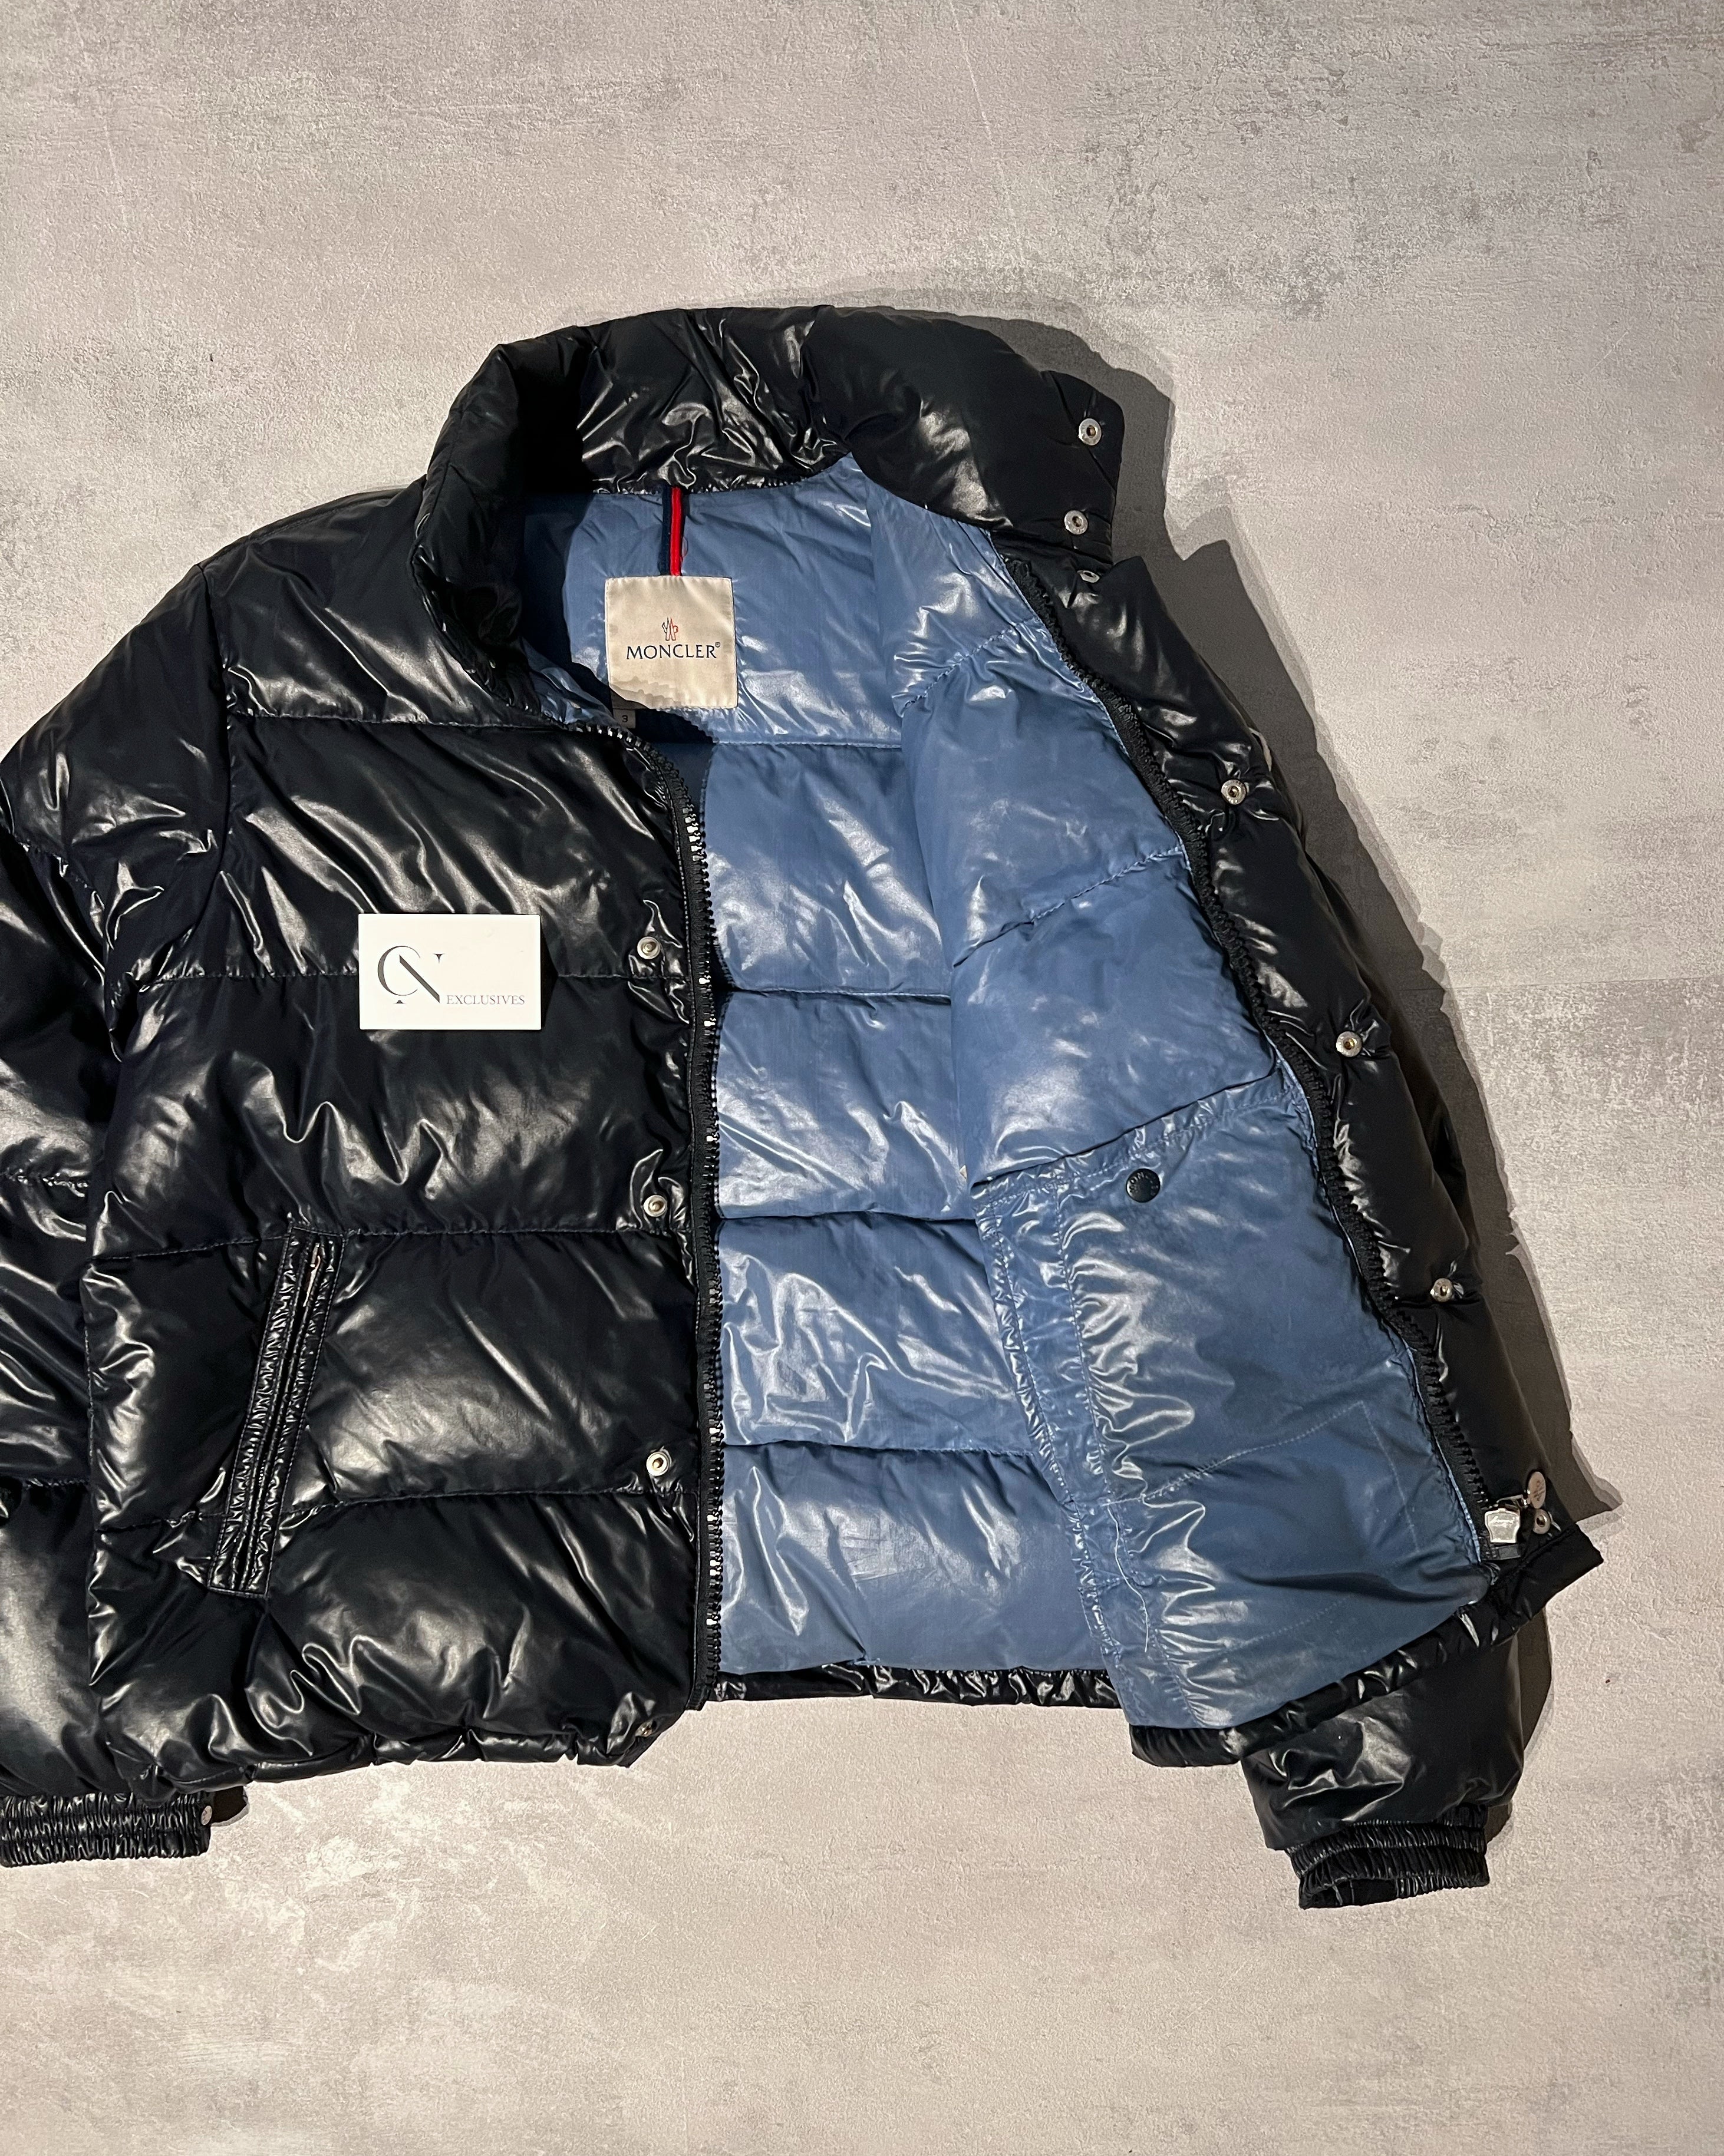 Moncler Ever Down Jacket - Size 3